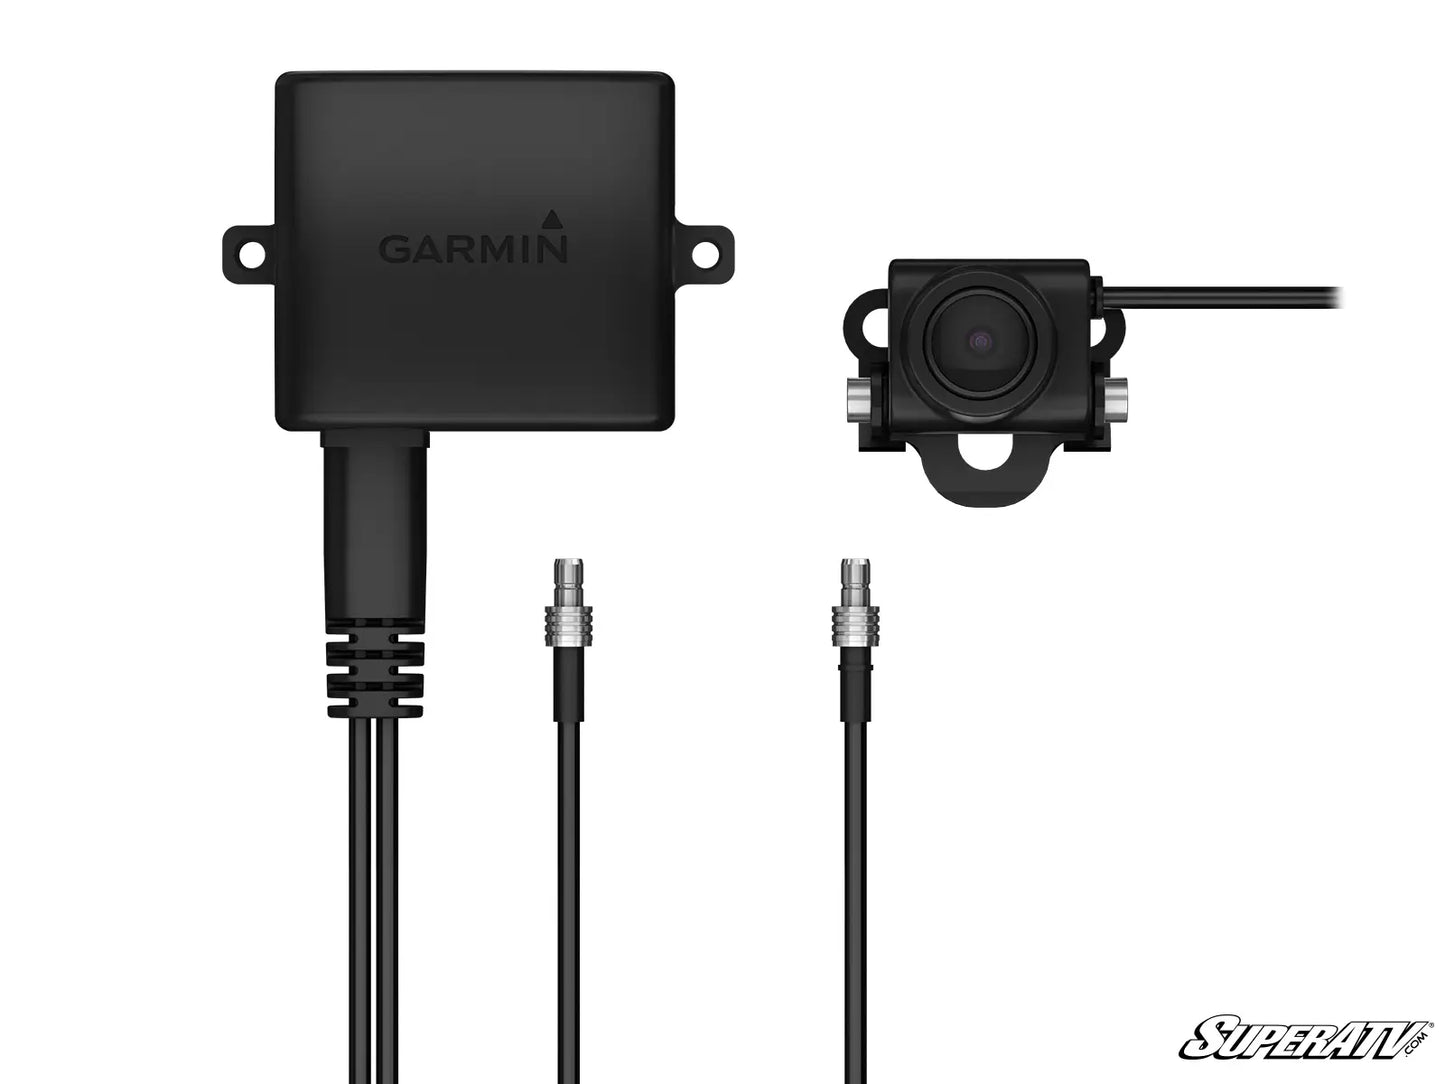 Garmin BC 50 wireless backup camera with license plate mount